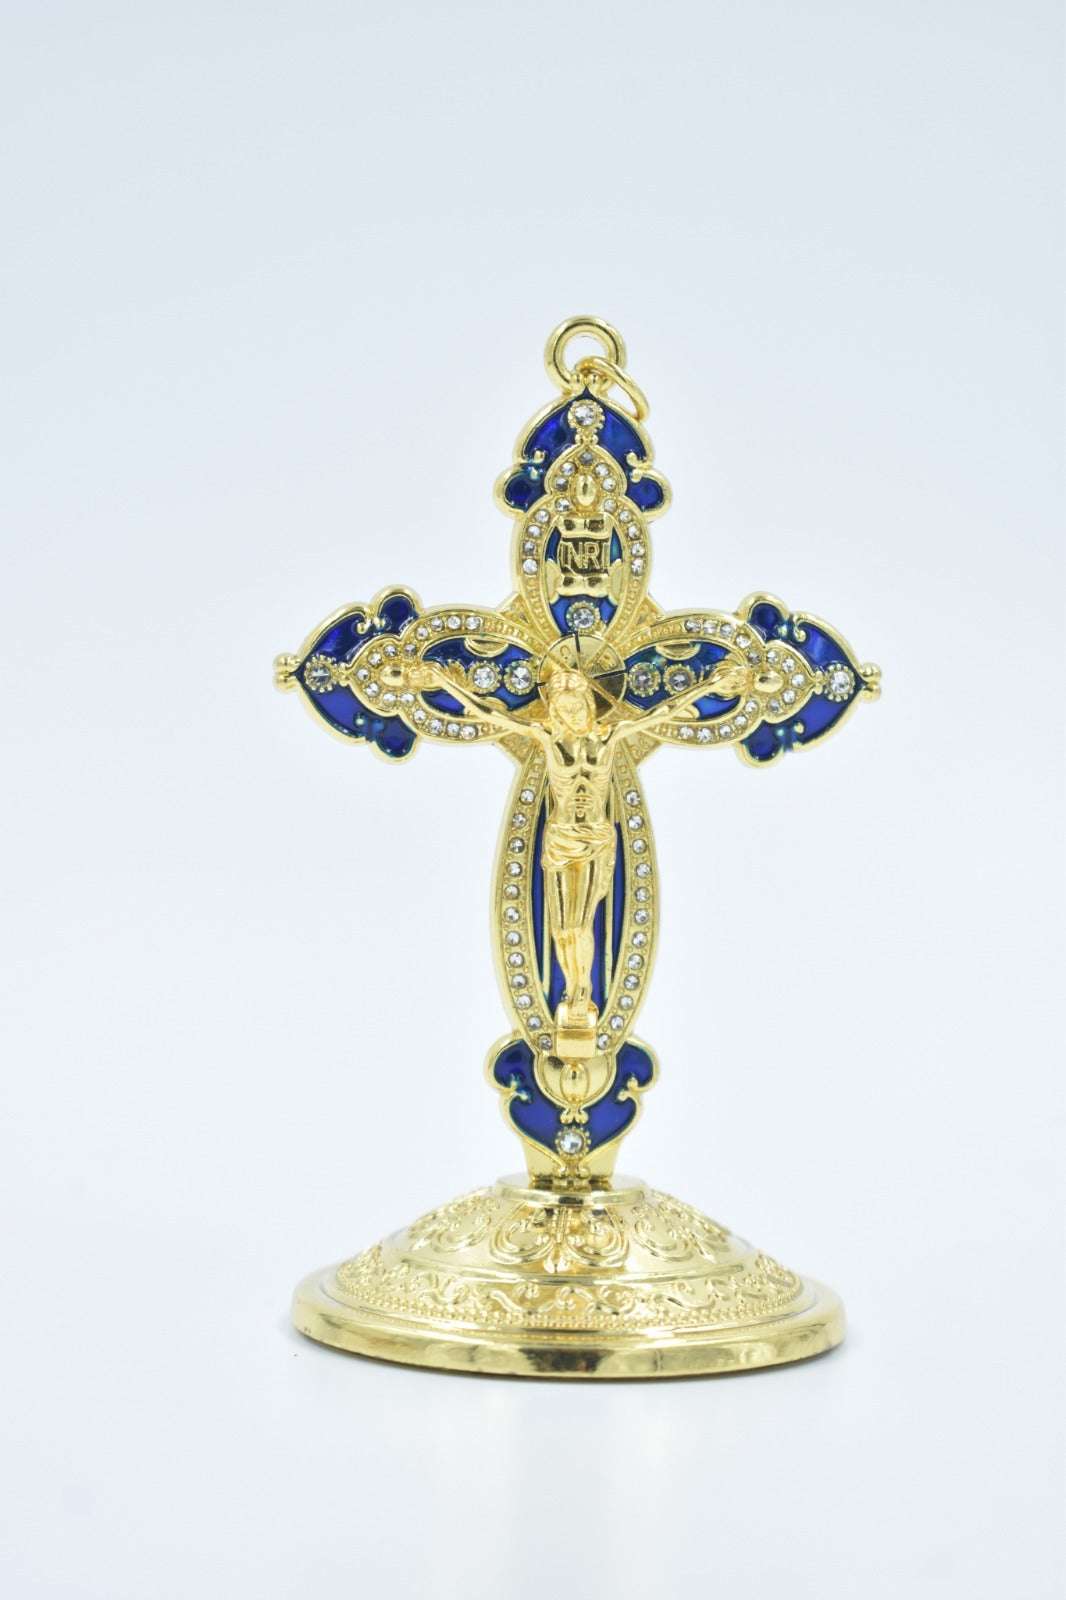 Gold and Blue Car Crucifix Statue | Unique Religious Figure for Vehicle Dashboard